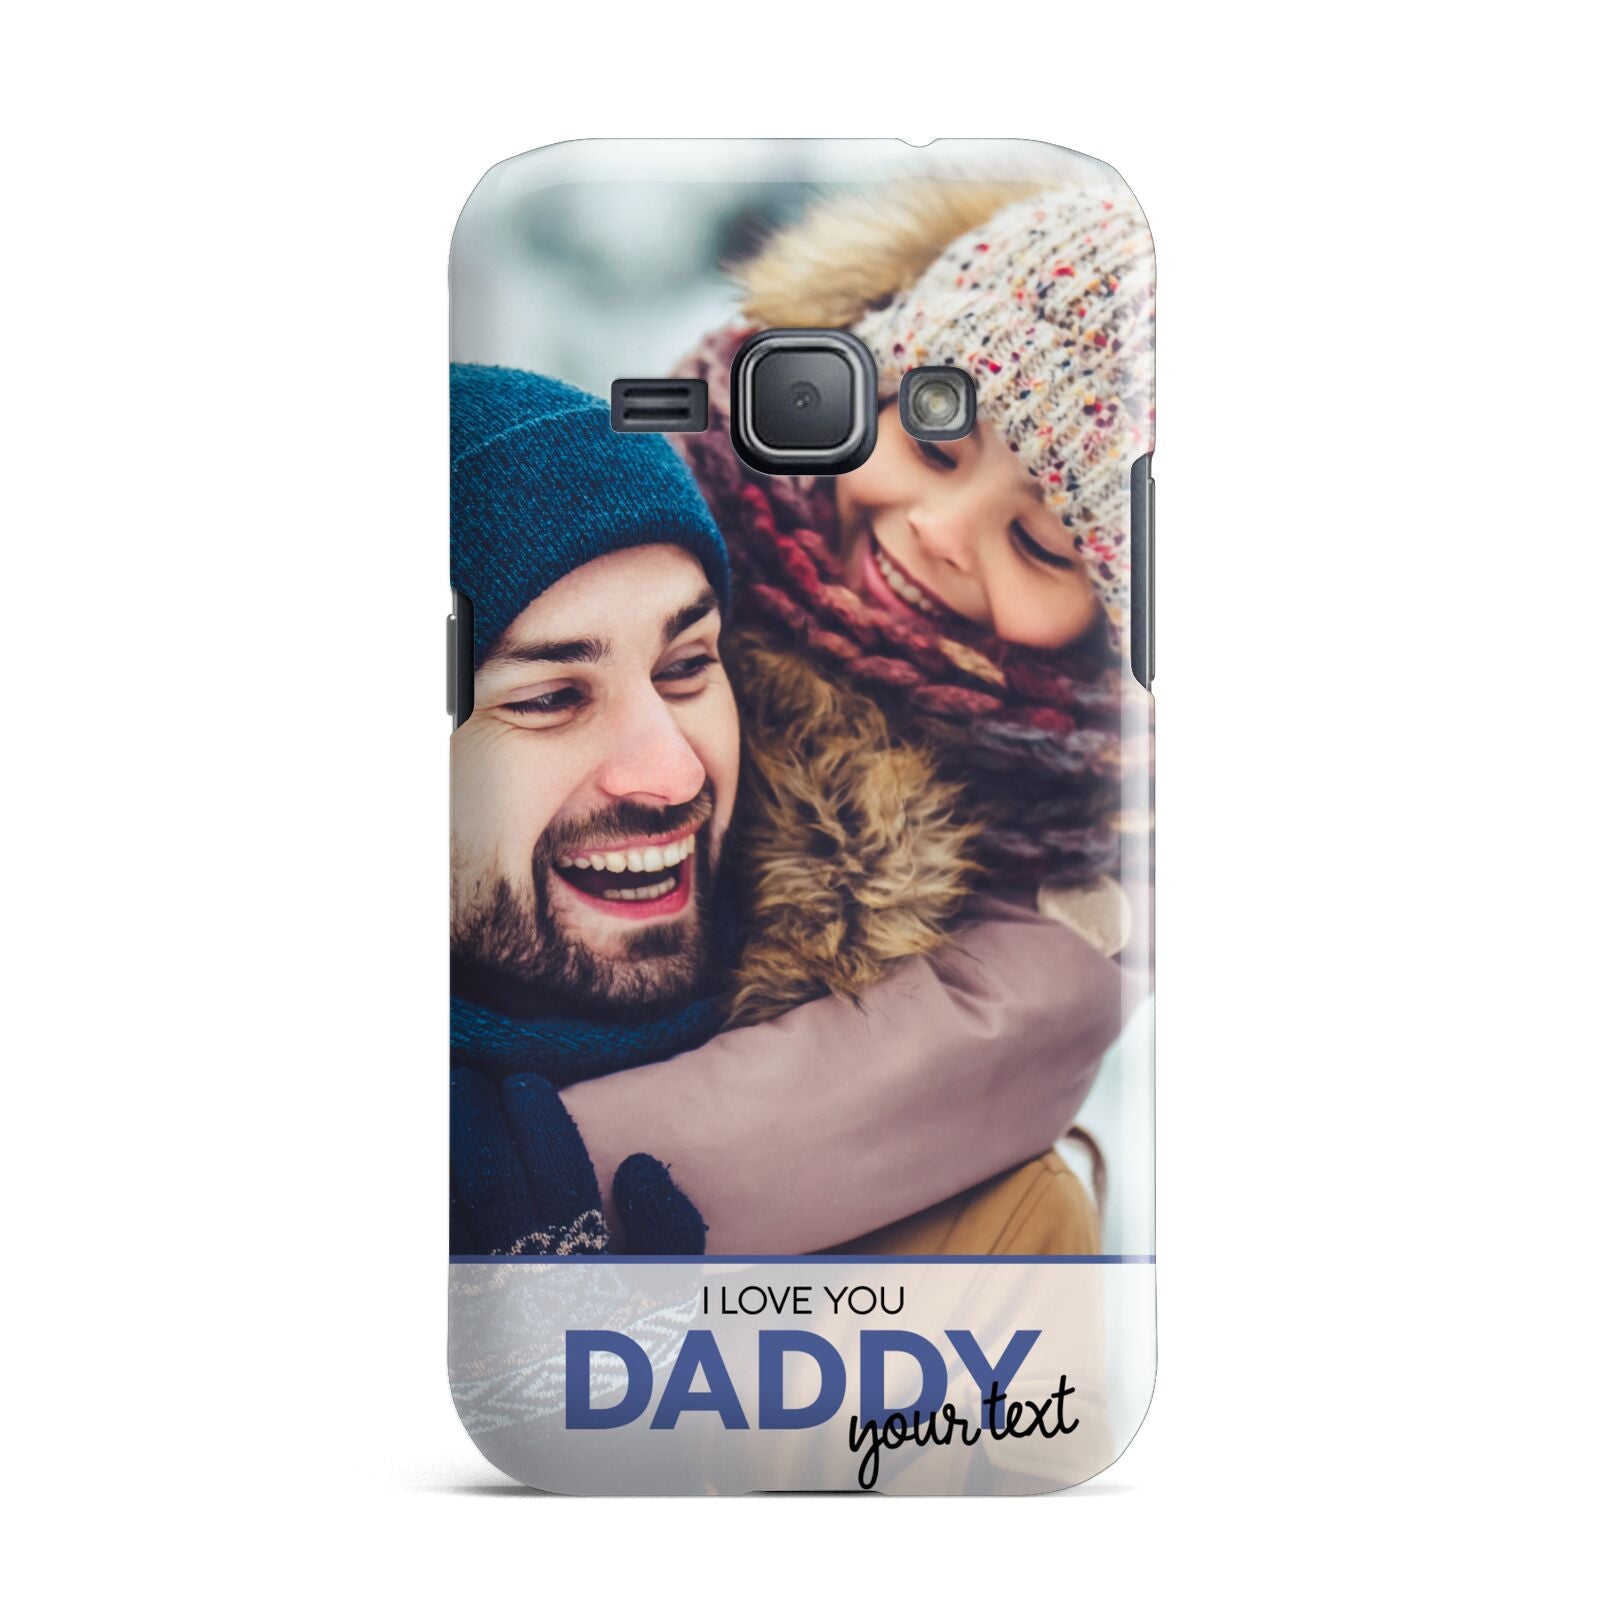 I Love You Daddy Personalised Photo Upload and Name Samsung Galaxy J1 2016 Case